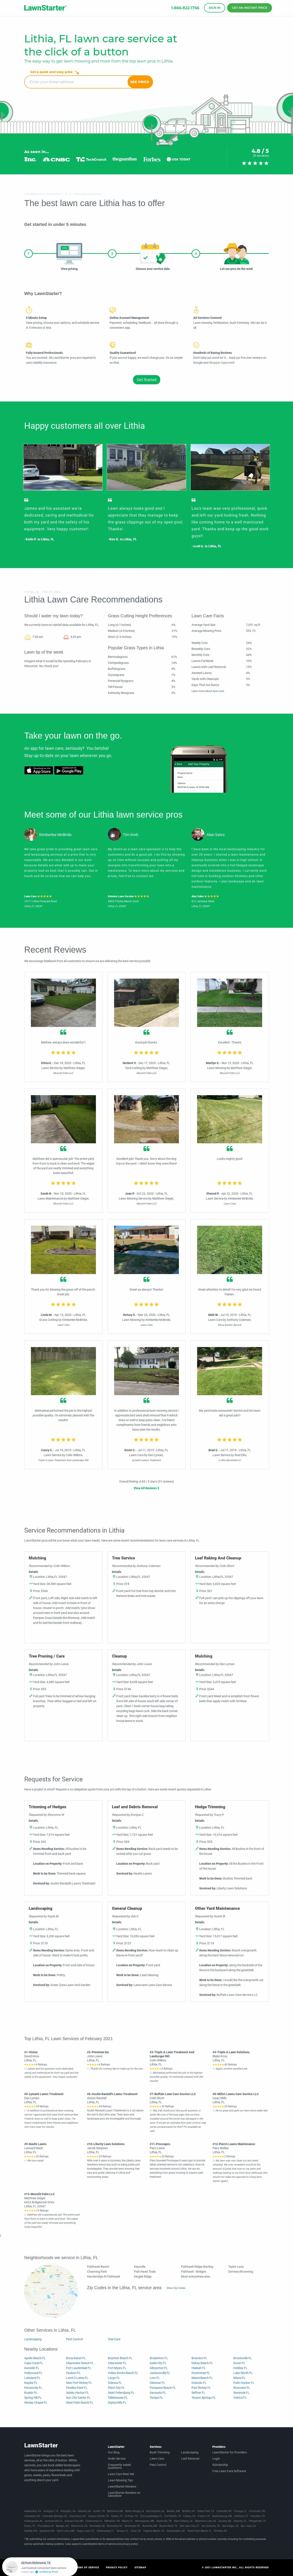 Landing Page Template for Lawn Care - lawnstarter.com